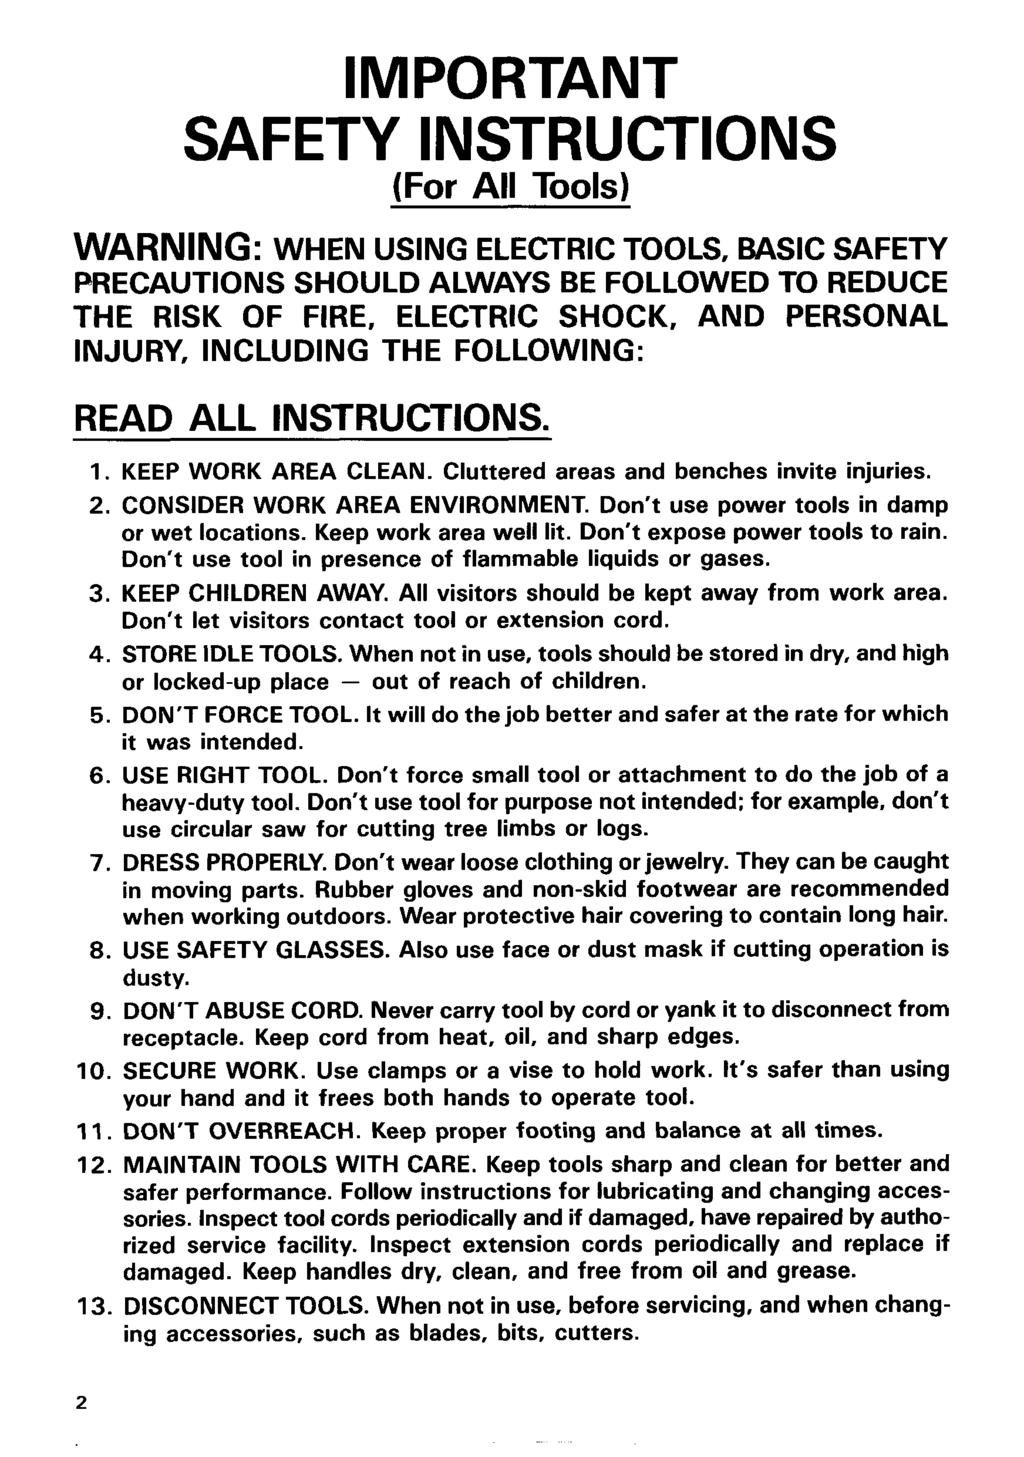 IMPORTANT SAFETY INSTRUCTIONS (For All Tools) WARNING: WHEN USING ELECTRIC TOOLS, BASIC SAFETY PRECAUTIONS SHOULD ALWAYS BE FOLLOWED TO REDUCE THE RISK OF FIRE, ELECTRIC SHOCK, AND PERSONAL INJURY,